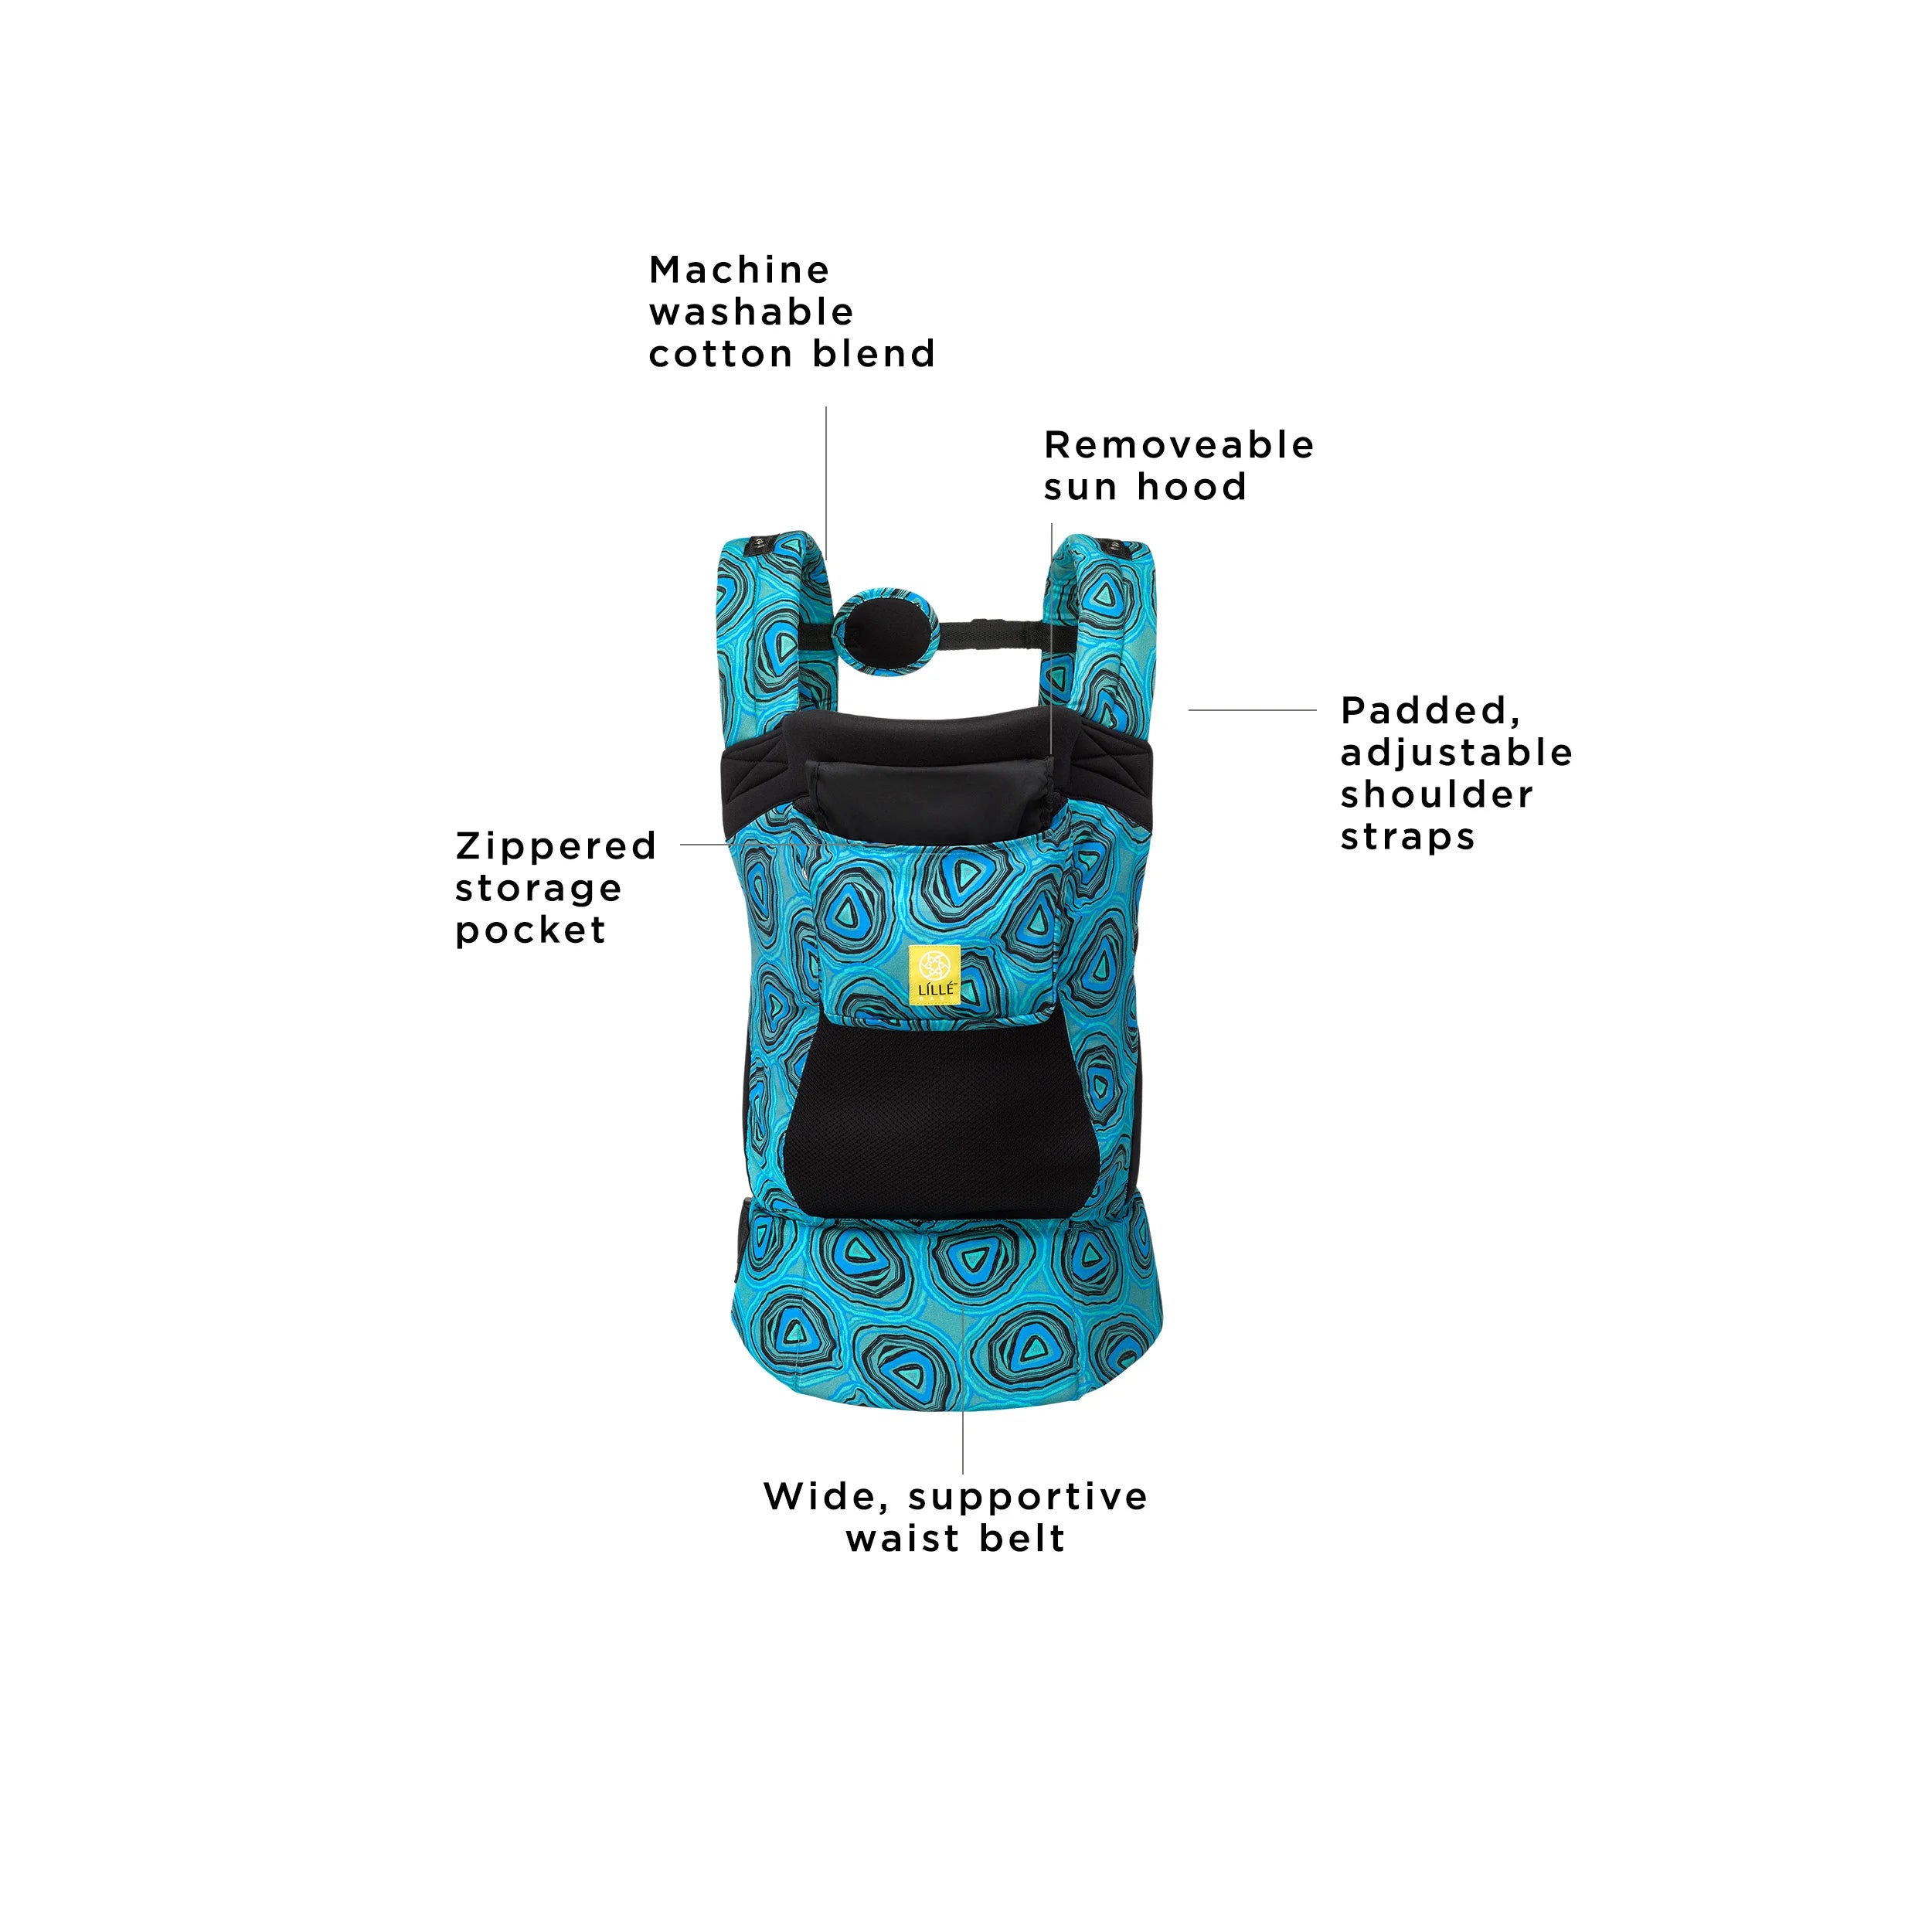 carryon airflow carriers are machine washable cotton blend, removeable sun hood, zippered storage pocket, padded adjustable shoulder straps, and wide supportive waist belt